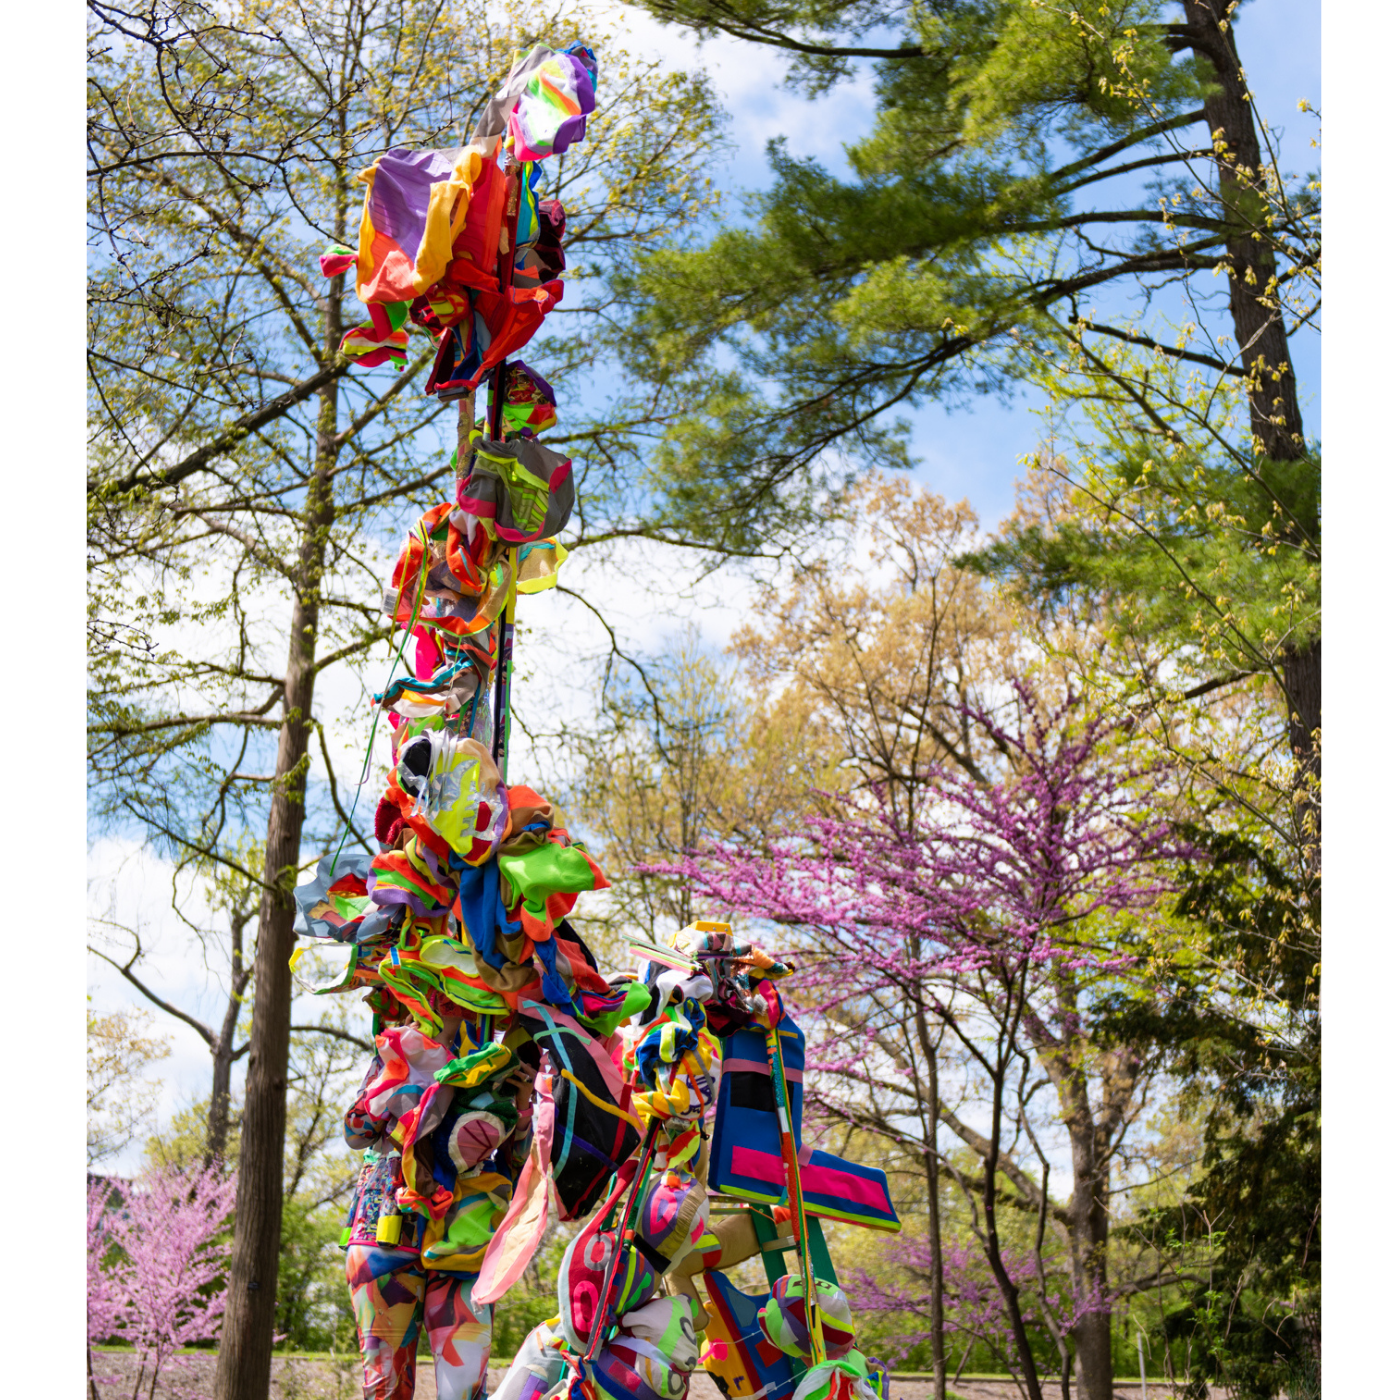 A tall brightly colored sculpture by Lindsey Whittle stands amongst trees.